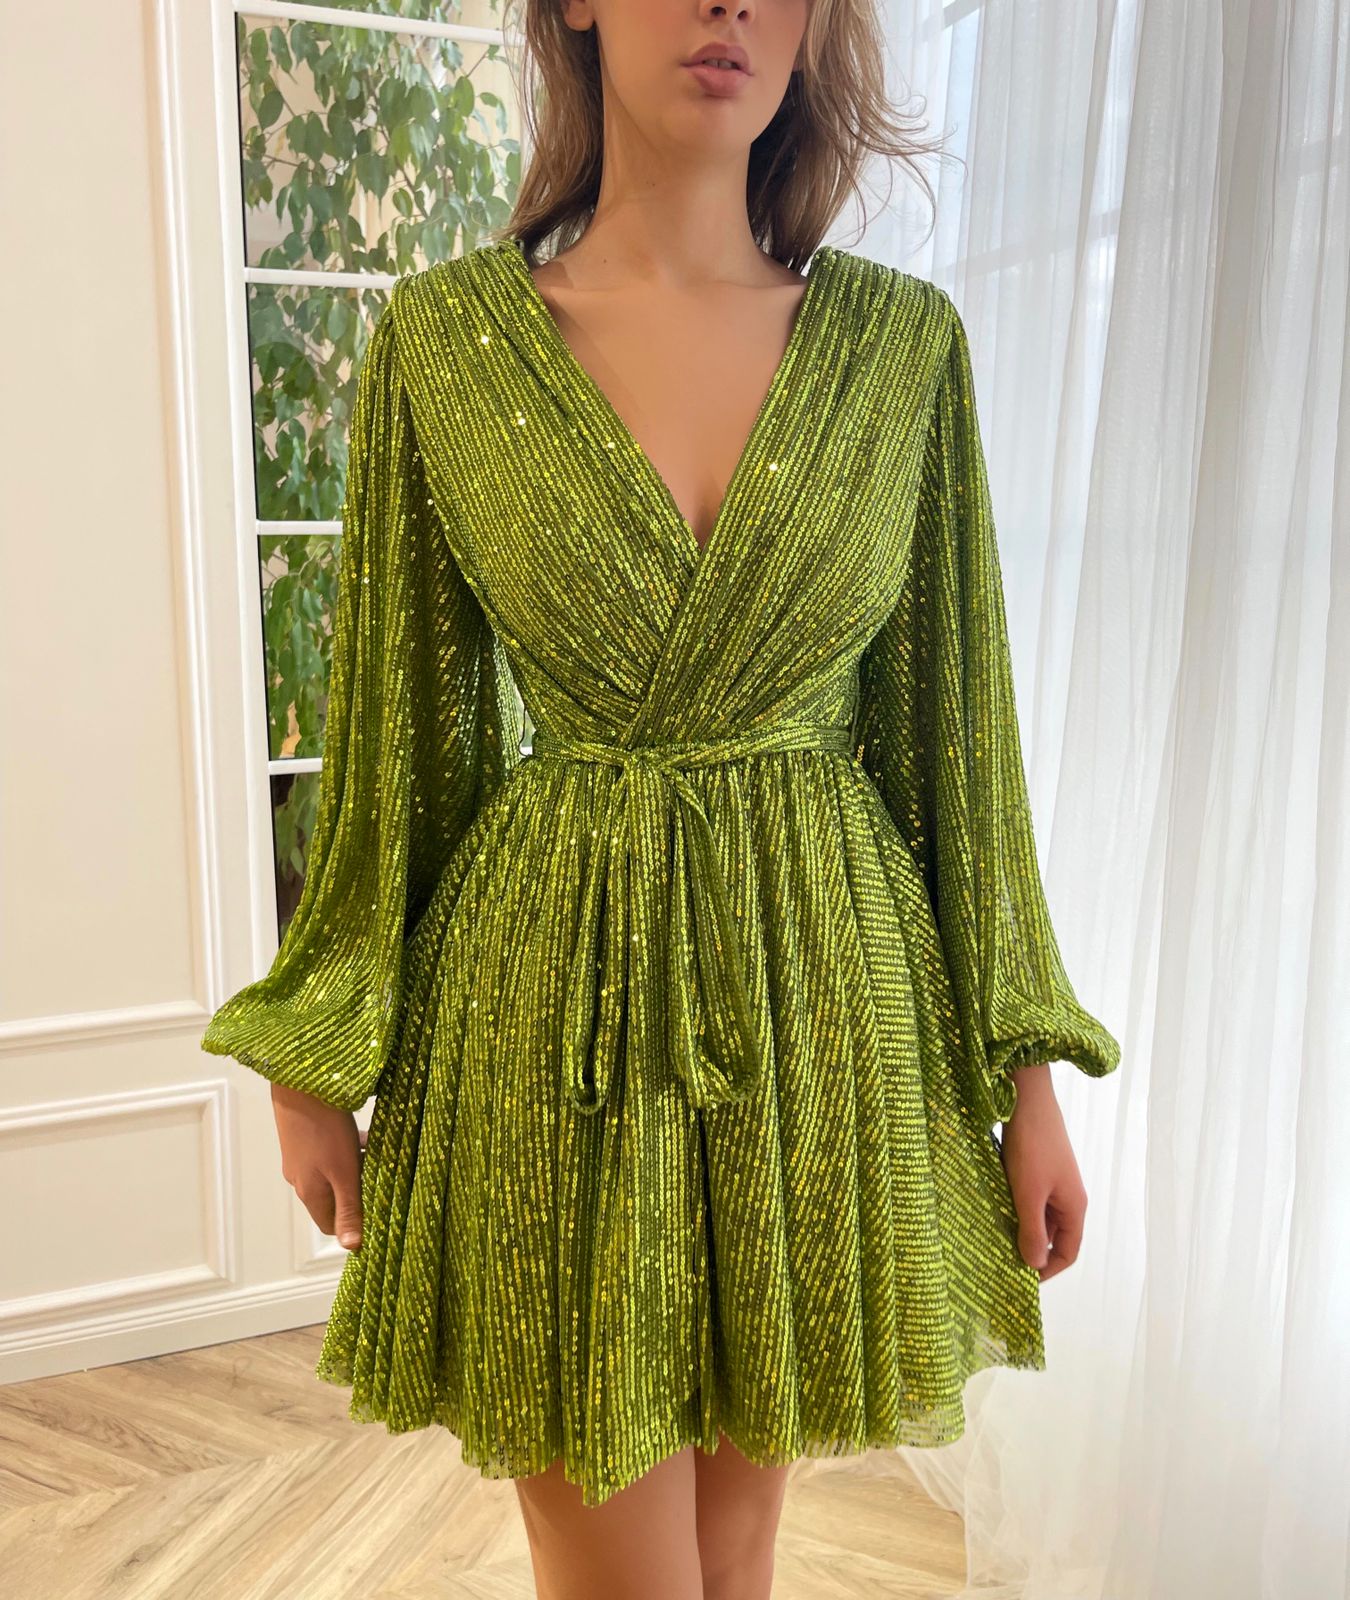 Green mini dress with sequins, v-neck and long sleeves